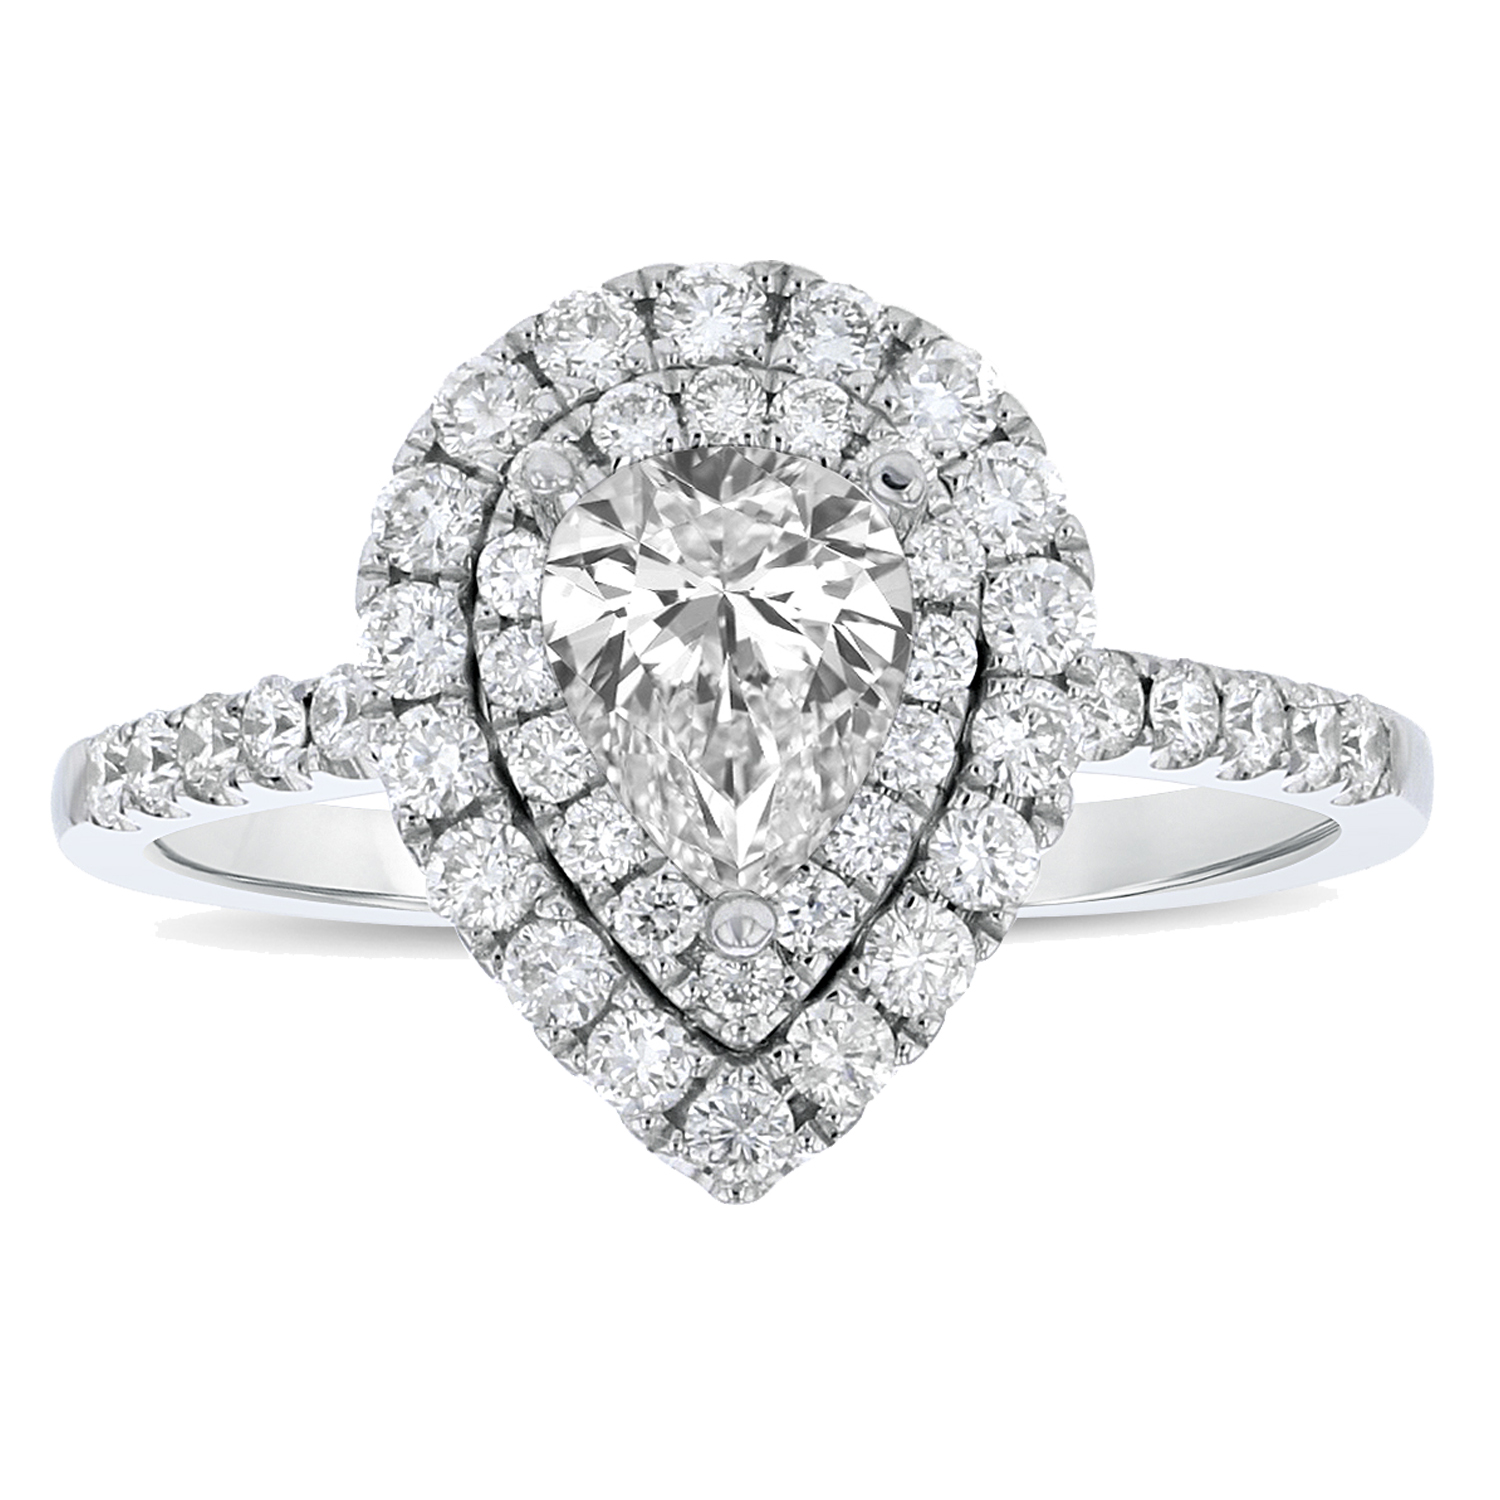 View 1.09ctw Diamond Engagment Ring in 18k white gold